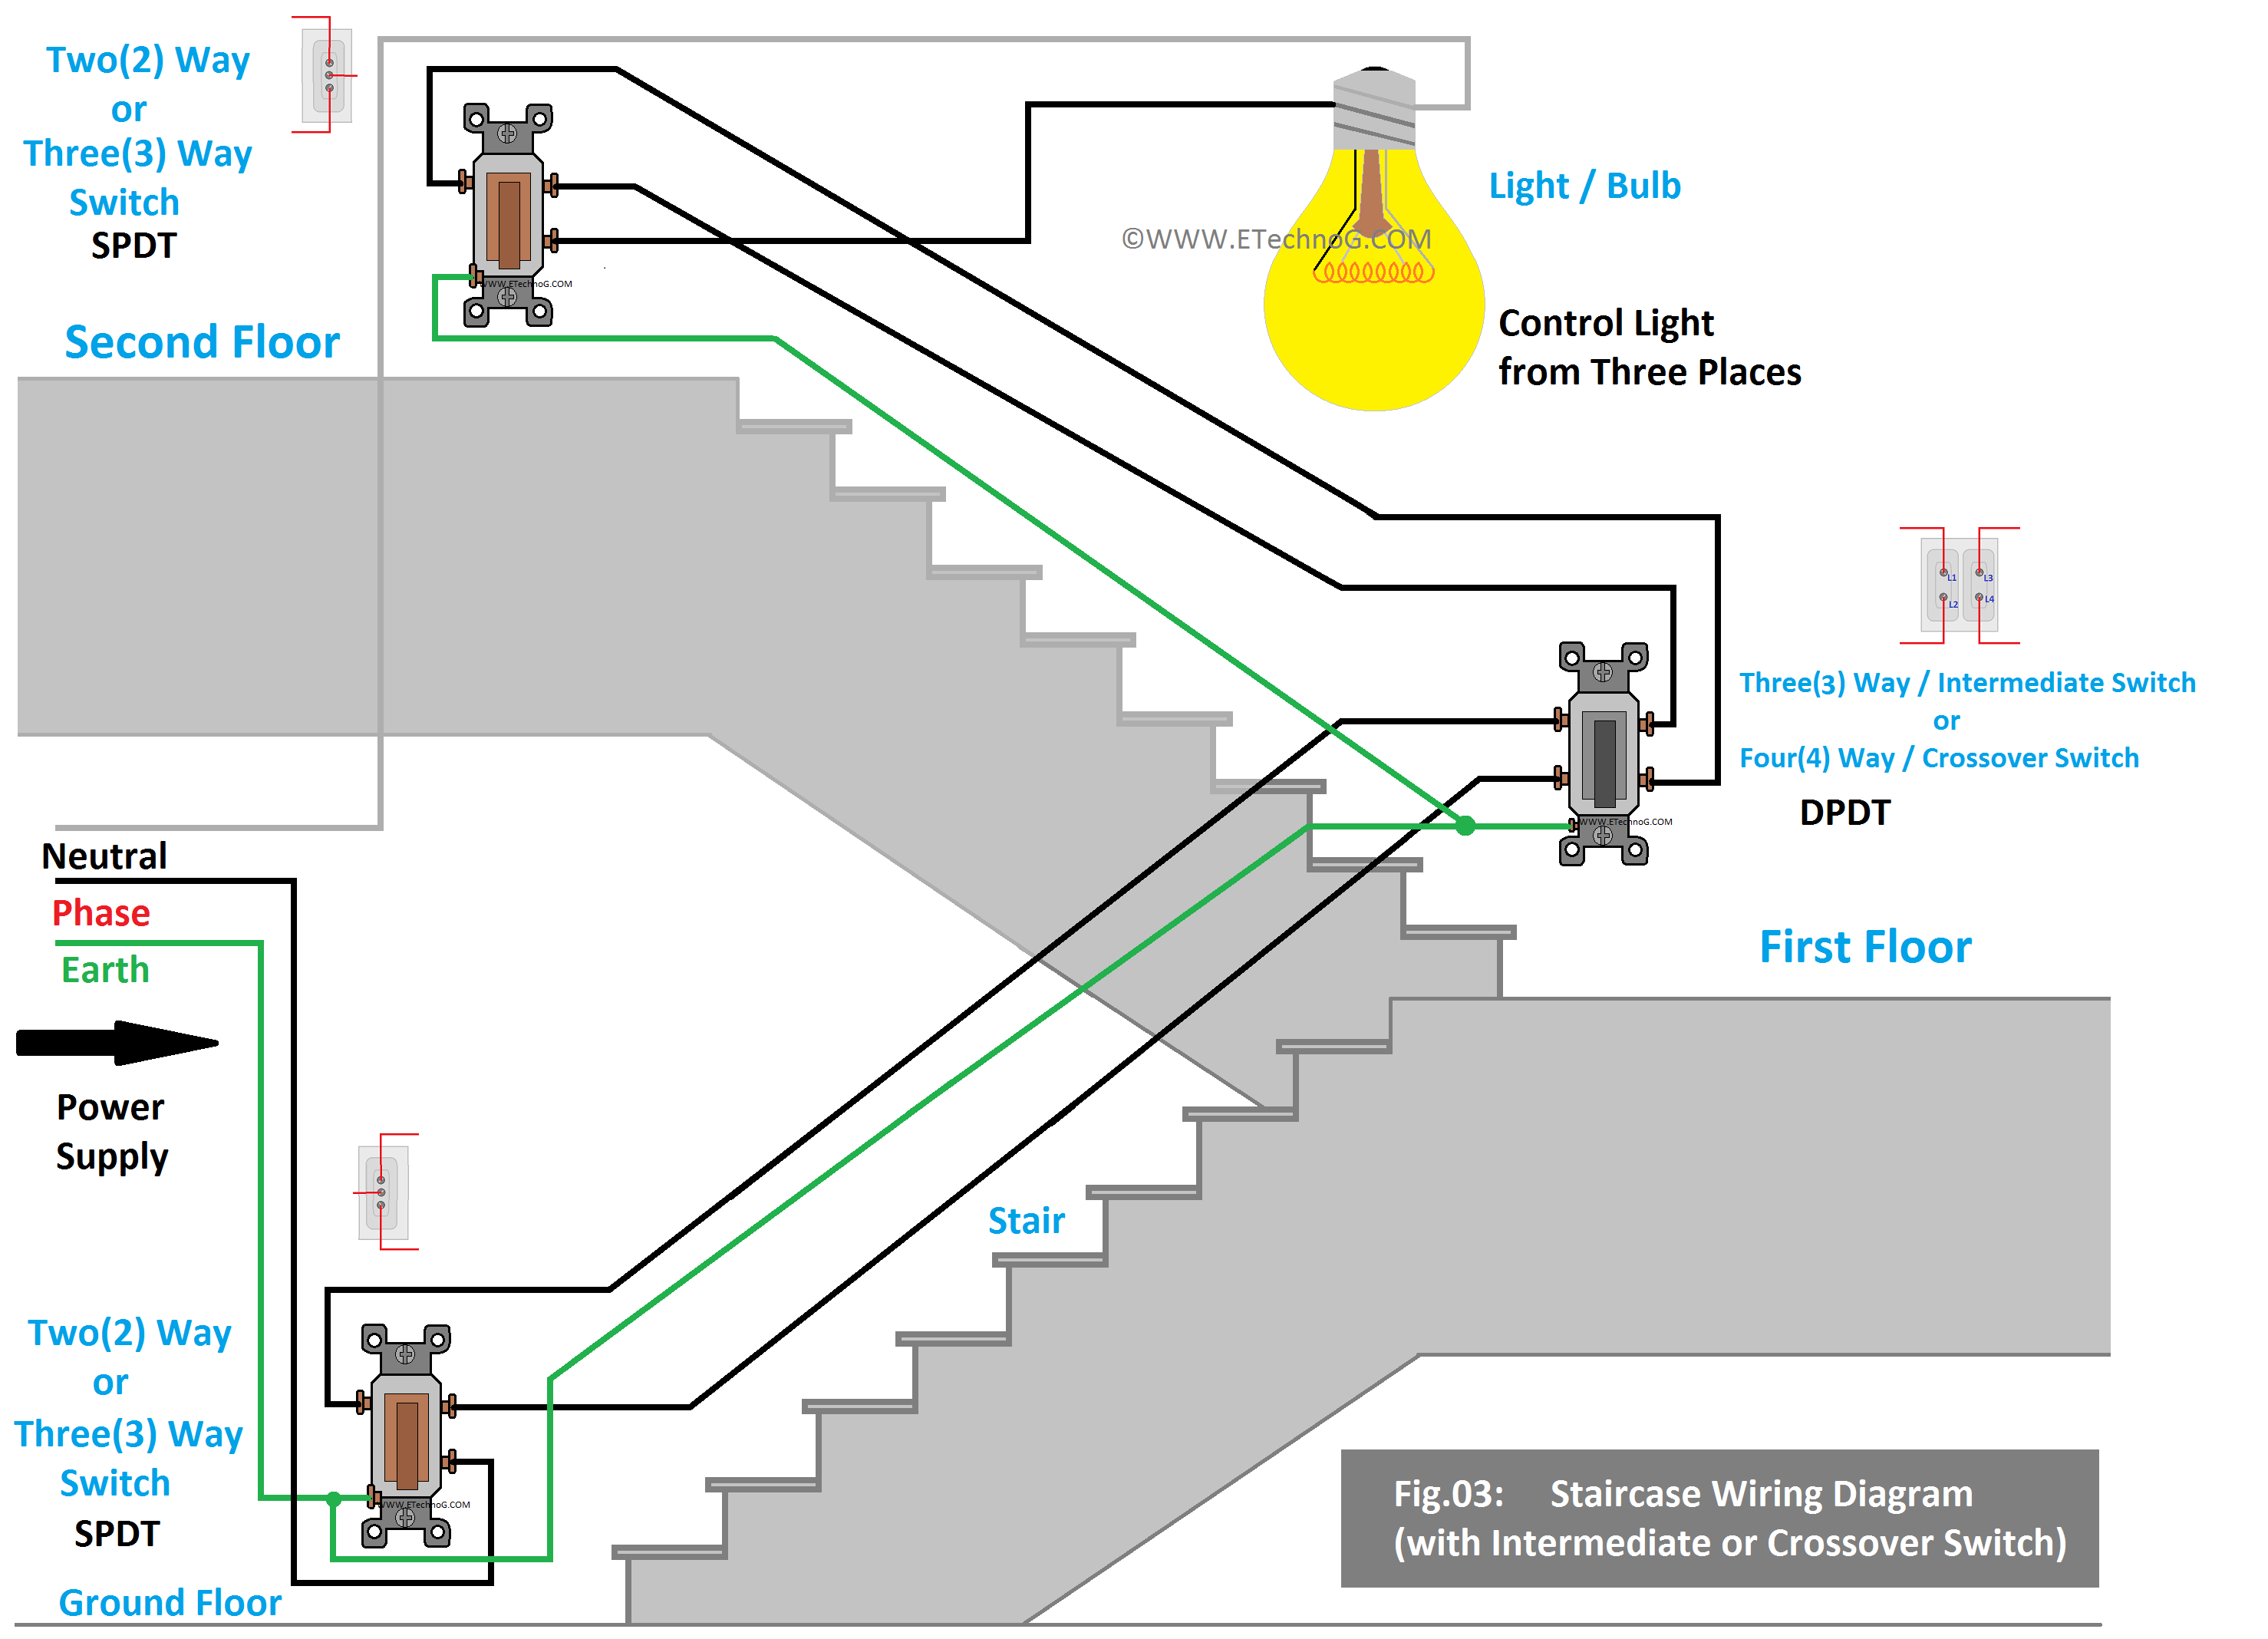 Staircase Wiring Diagram(Crossover, Intermediate, 3 way, 4 way, DPDT switch), control light from three places